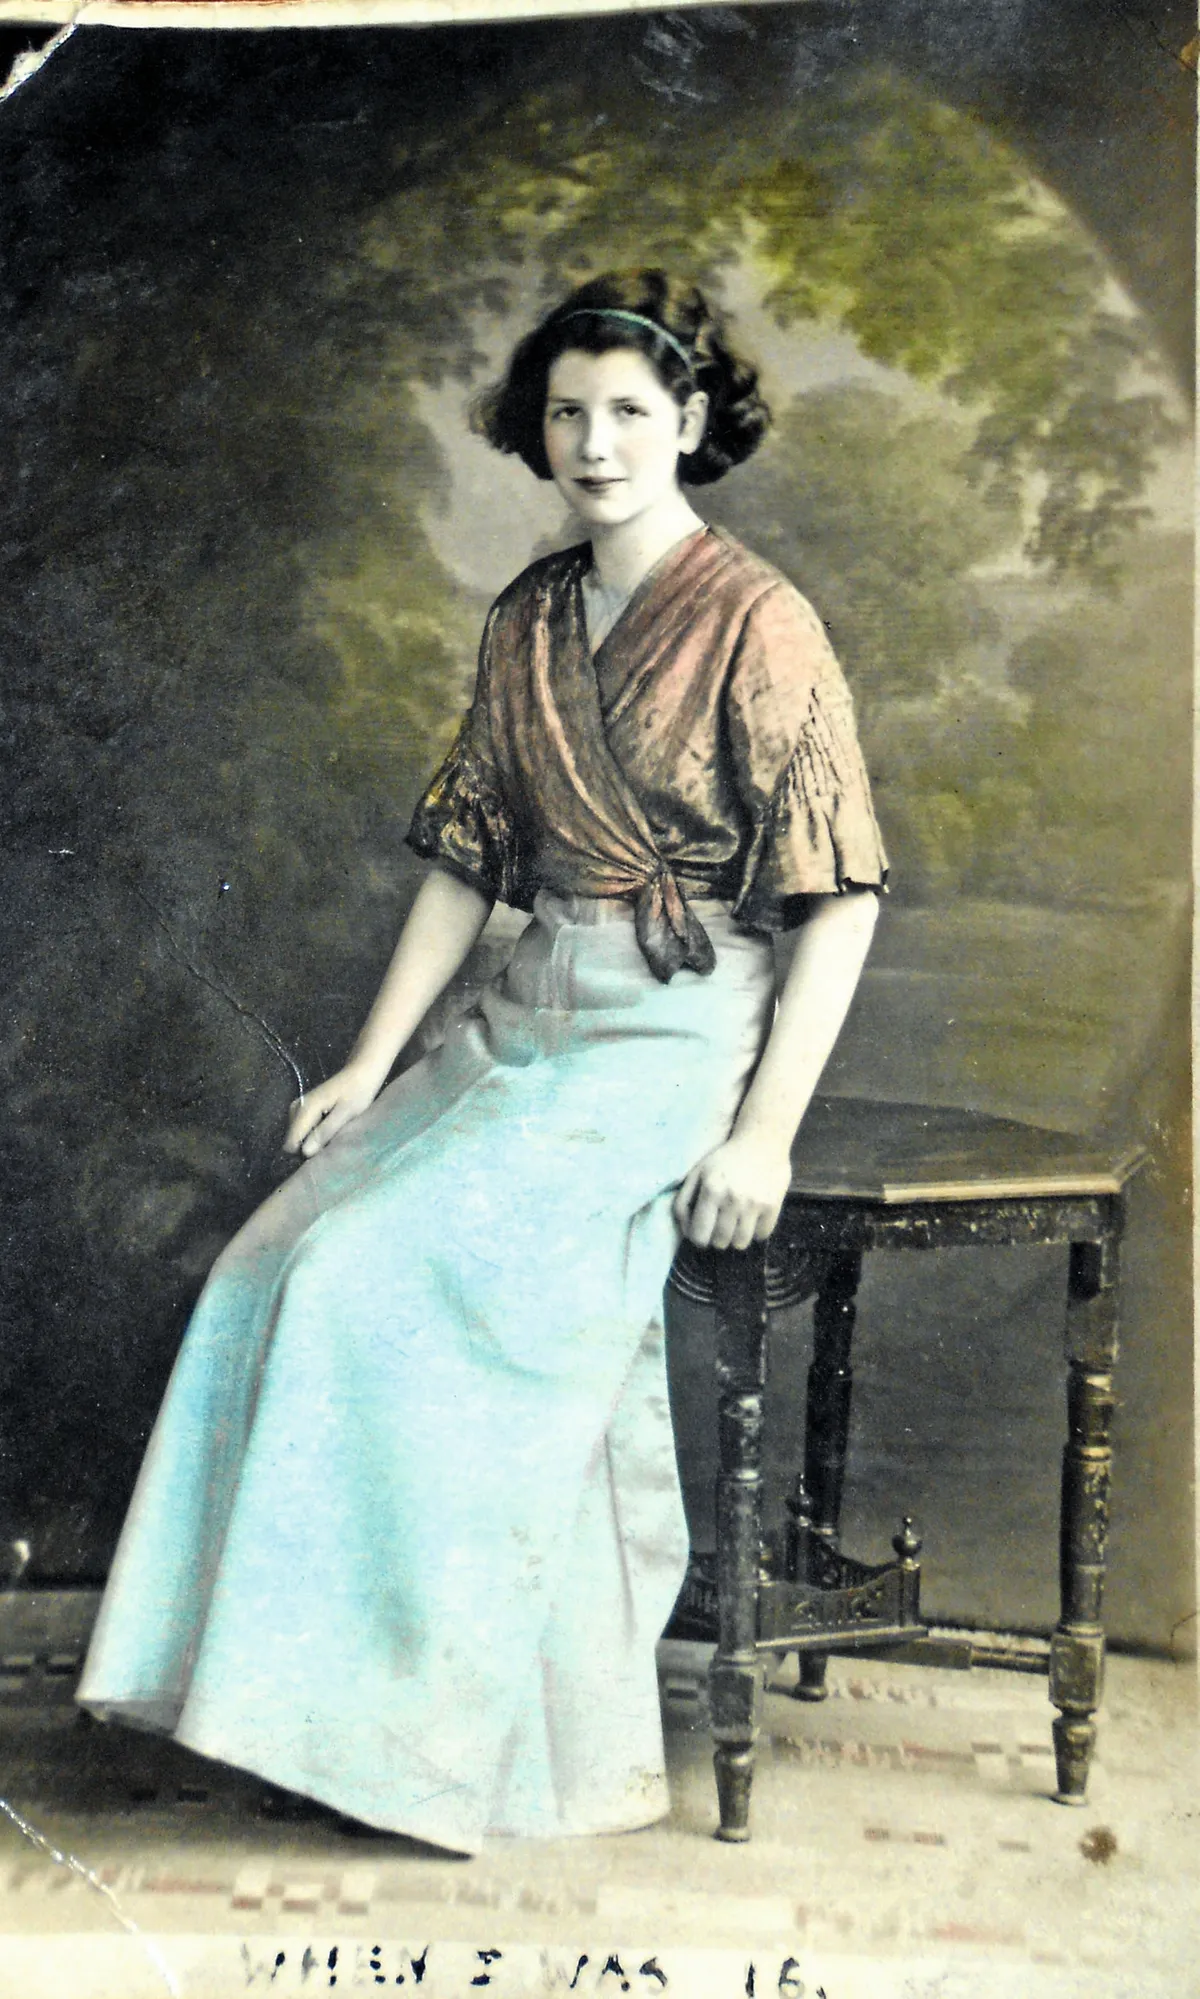 Colour-tinted photograph of a young woman with brown hair wearing an orange shawl and long blue skirt.